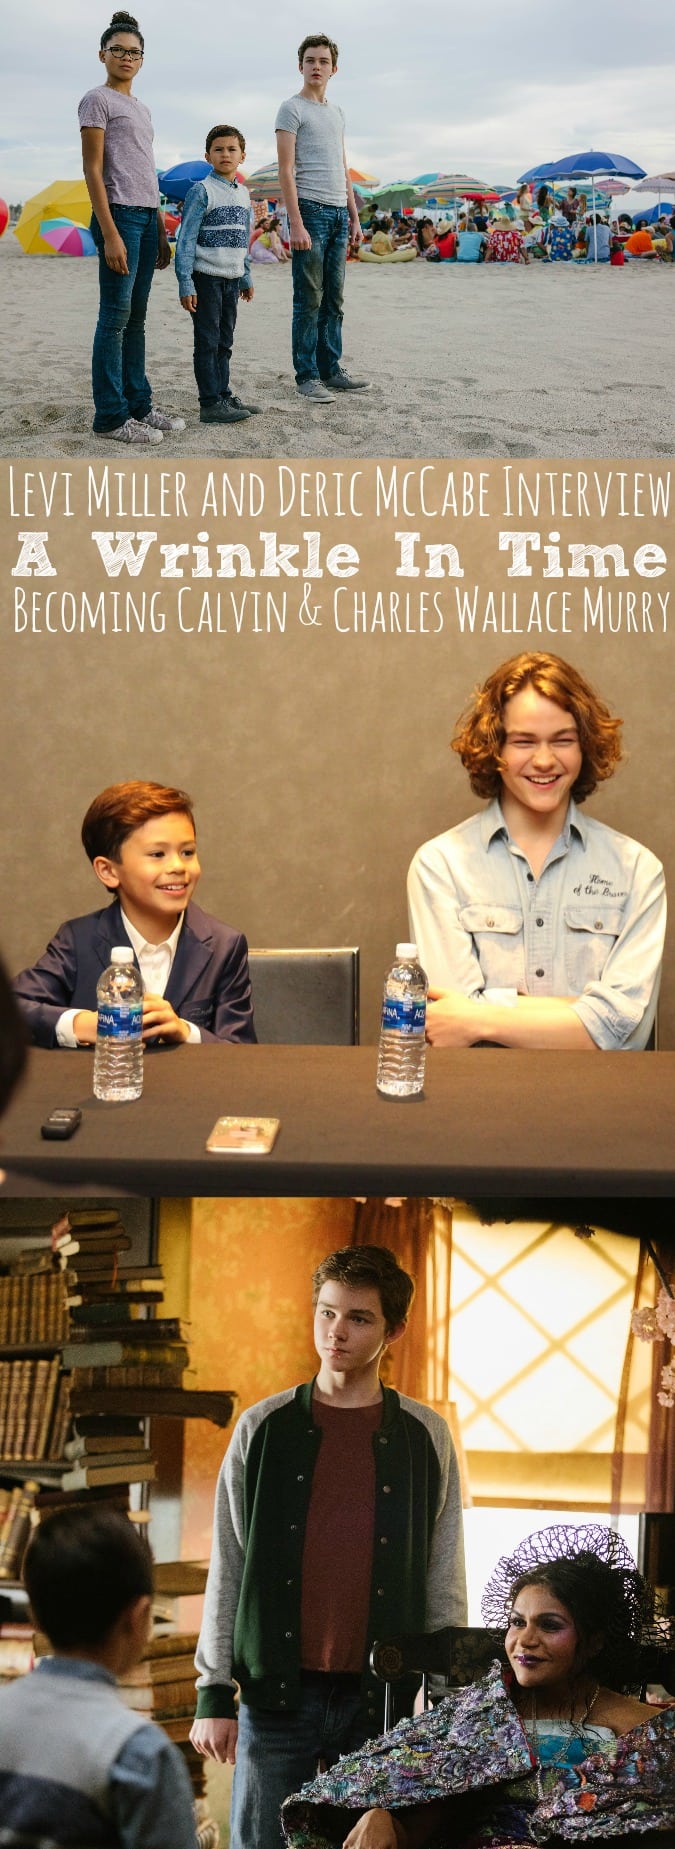 Levi Miller and Deric McCabe Interviews A Wrinkle In Time | Becoming Calvin & Charles Wallace Murry - simplytodaylife.com